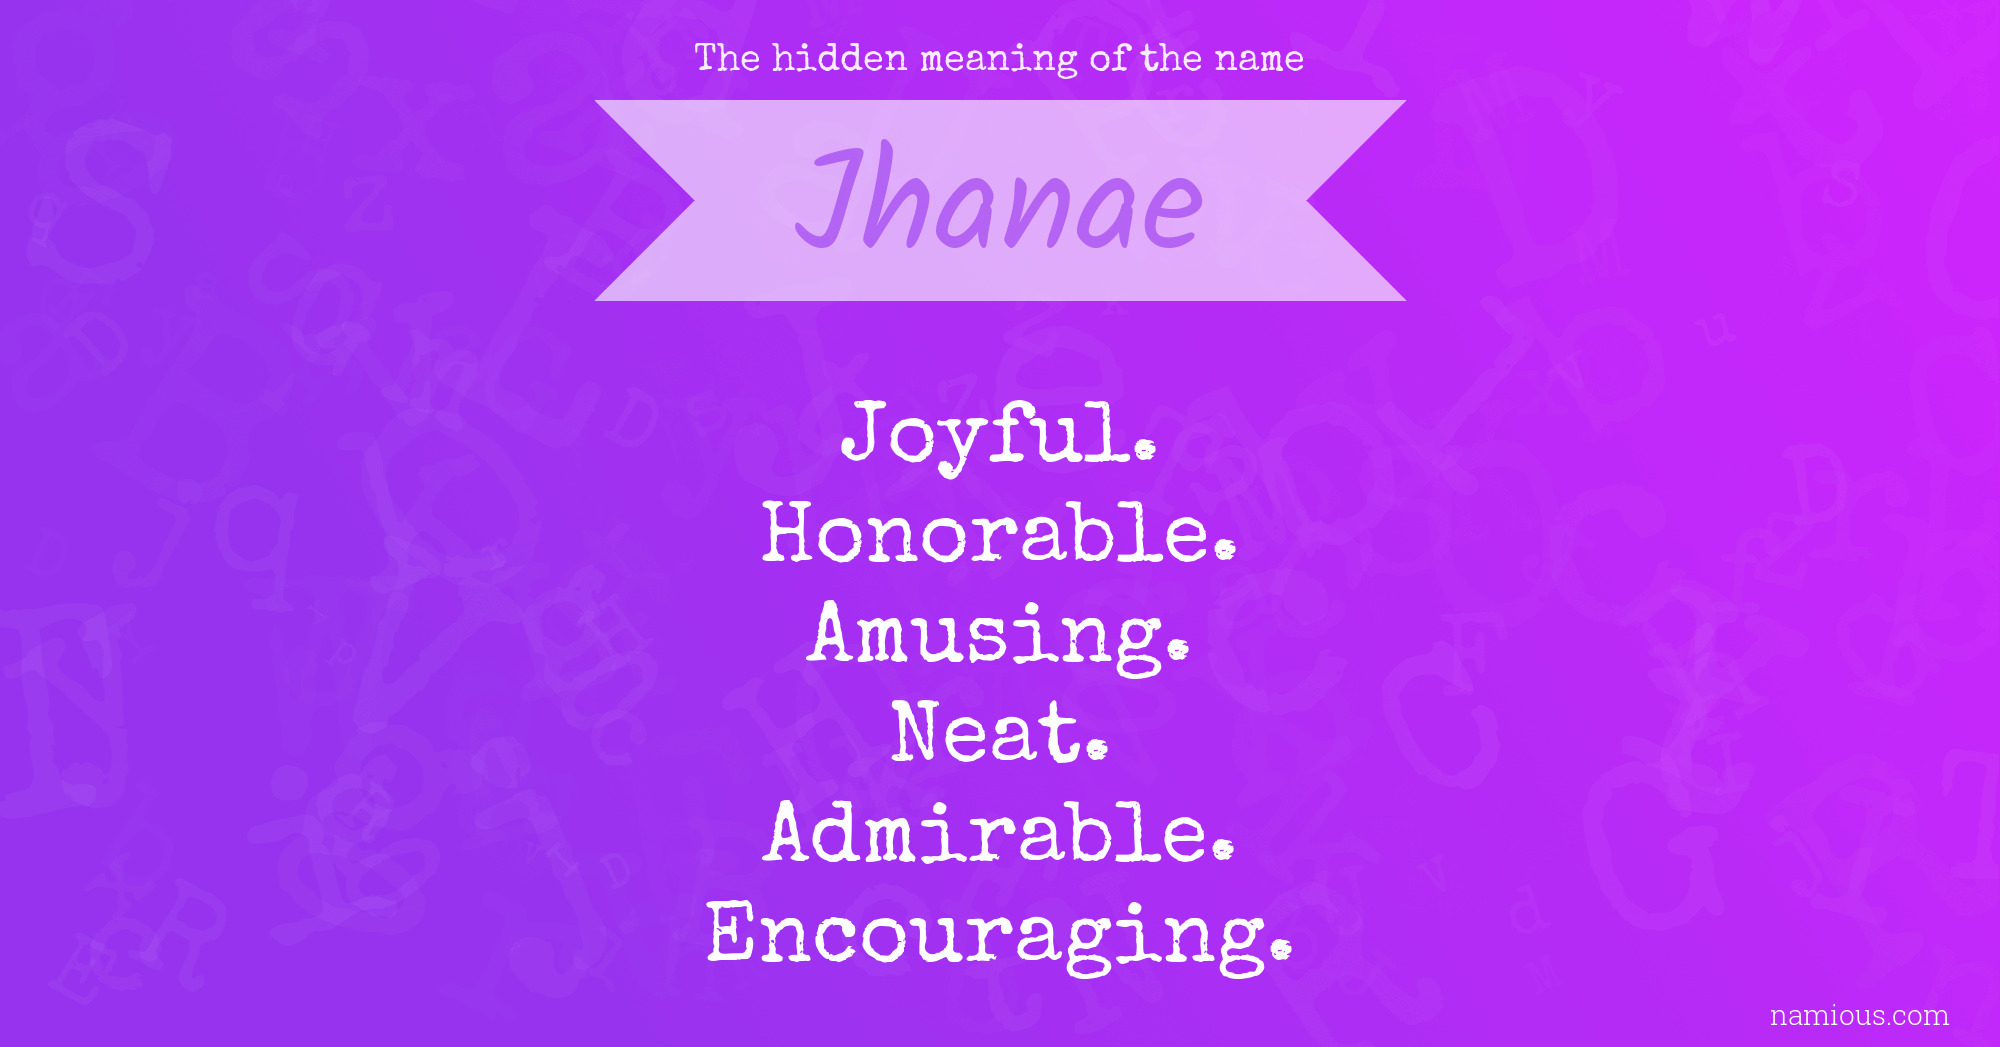 The hidden meaning of the name Jhanae